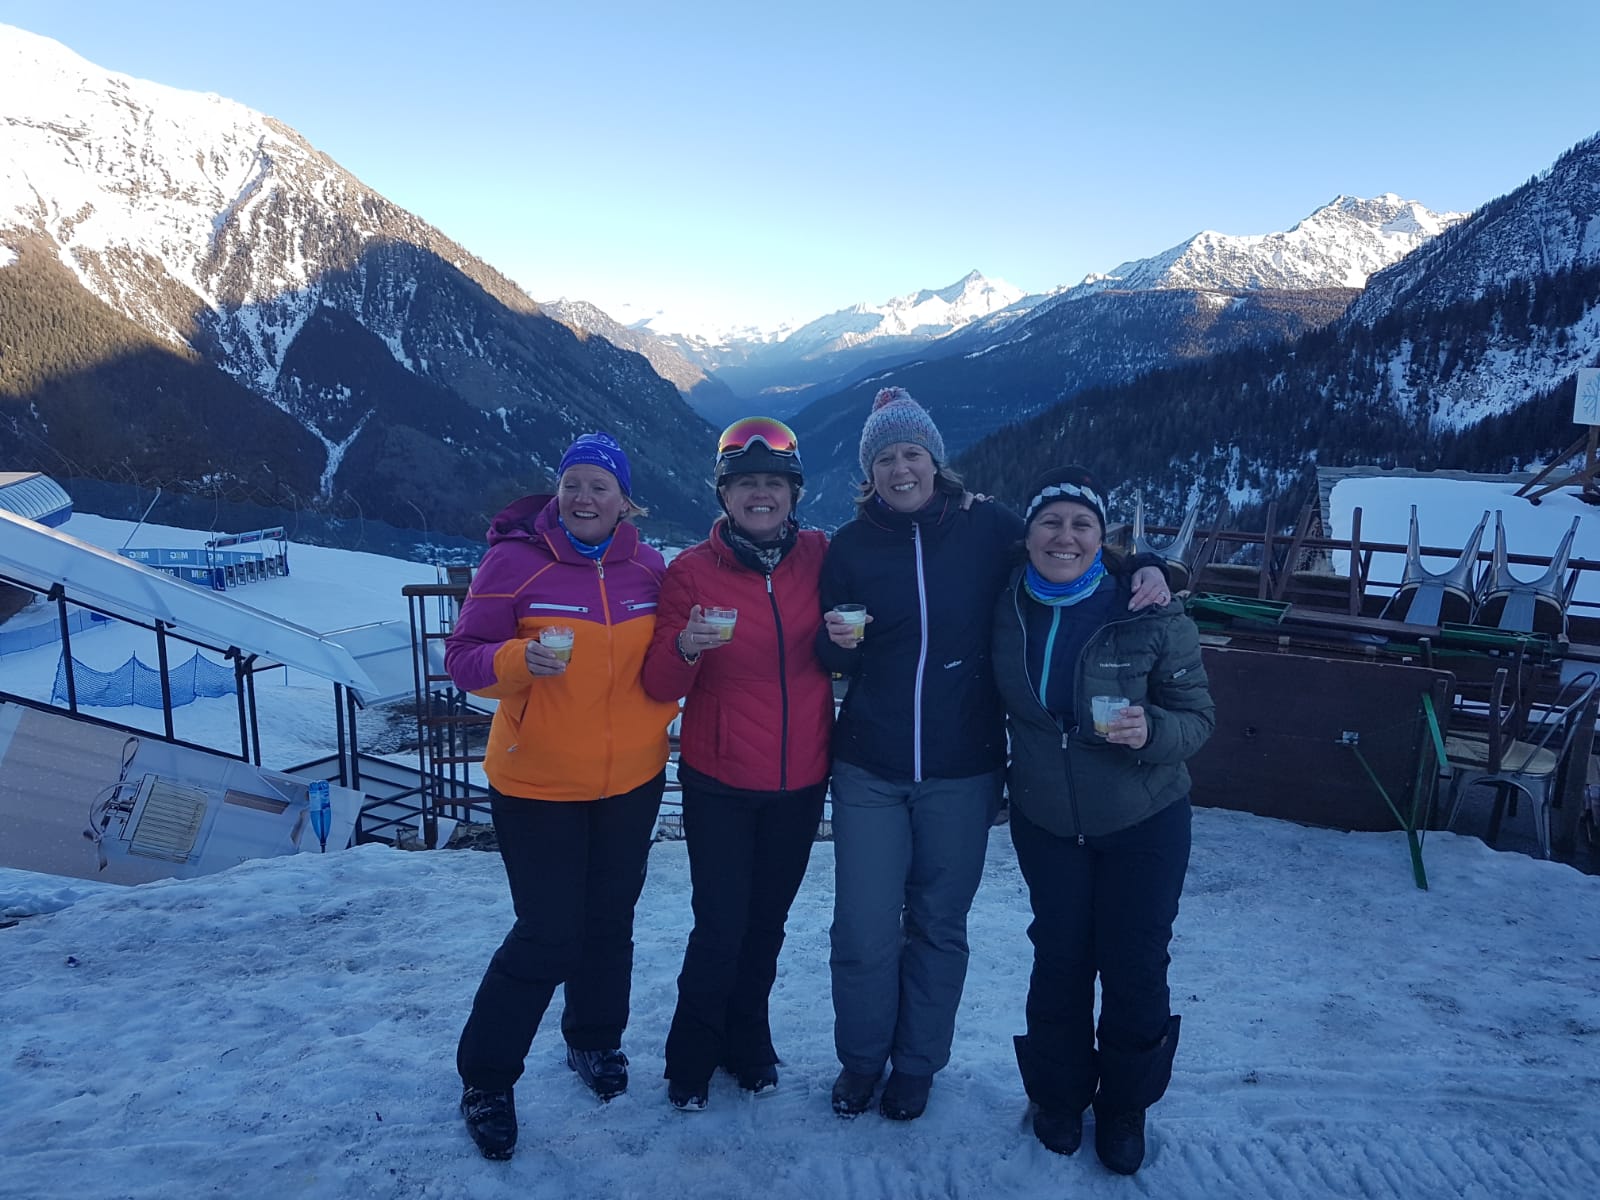 Bombardinos at Plan Chécrouit. Photo: someone of our clan. The Half Term Family Ski Holiday that did not result as planned.